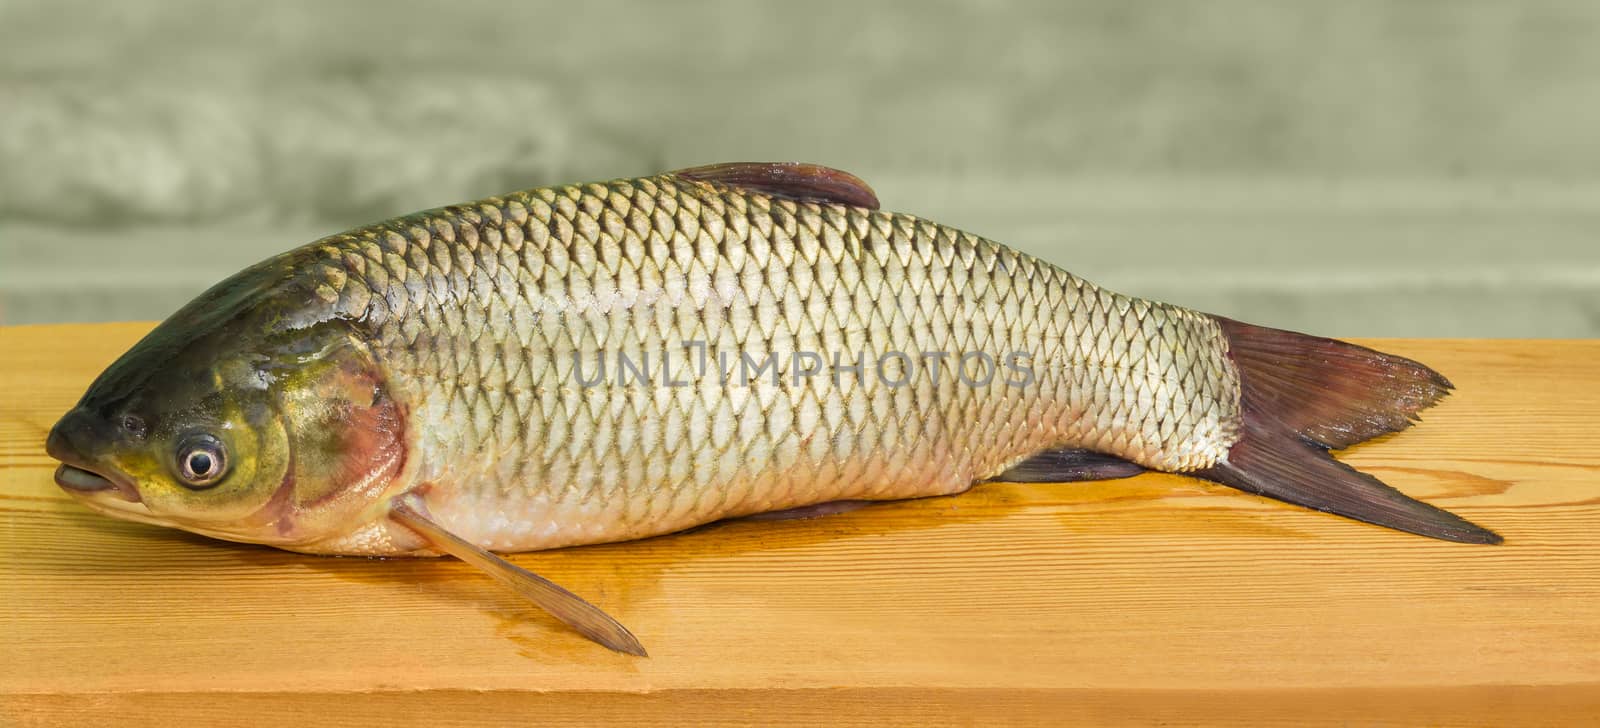 Freshly caught grass carp on a wooden surface by anmbph